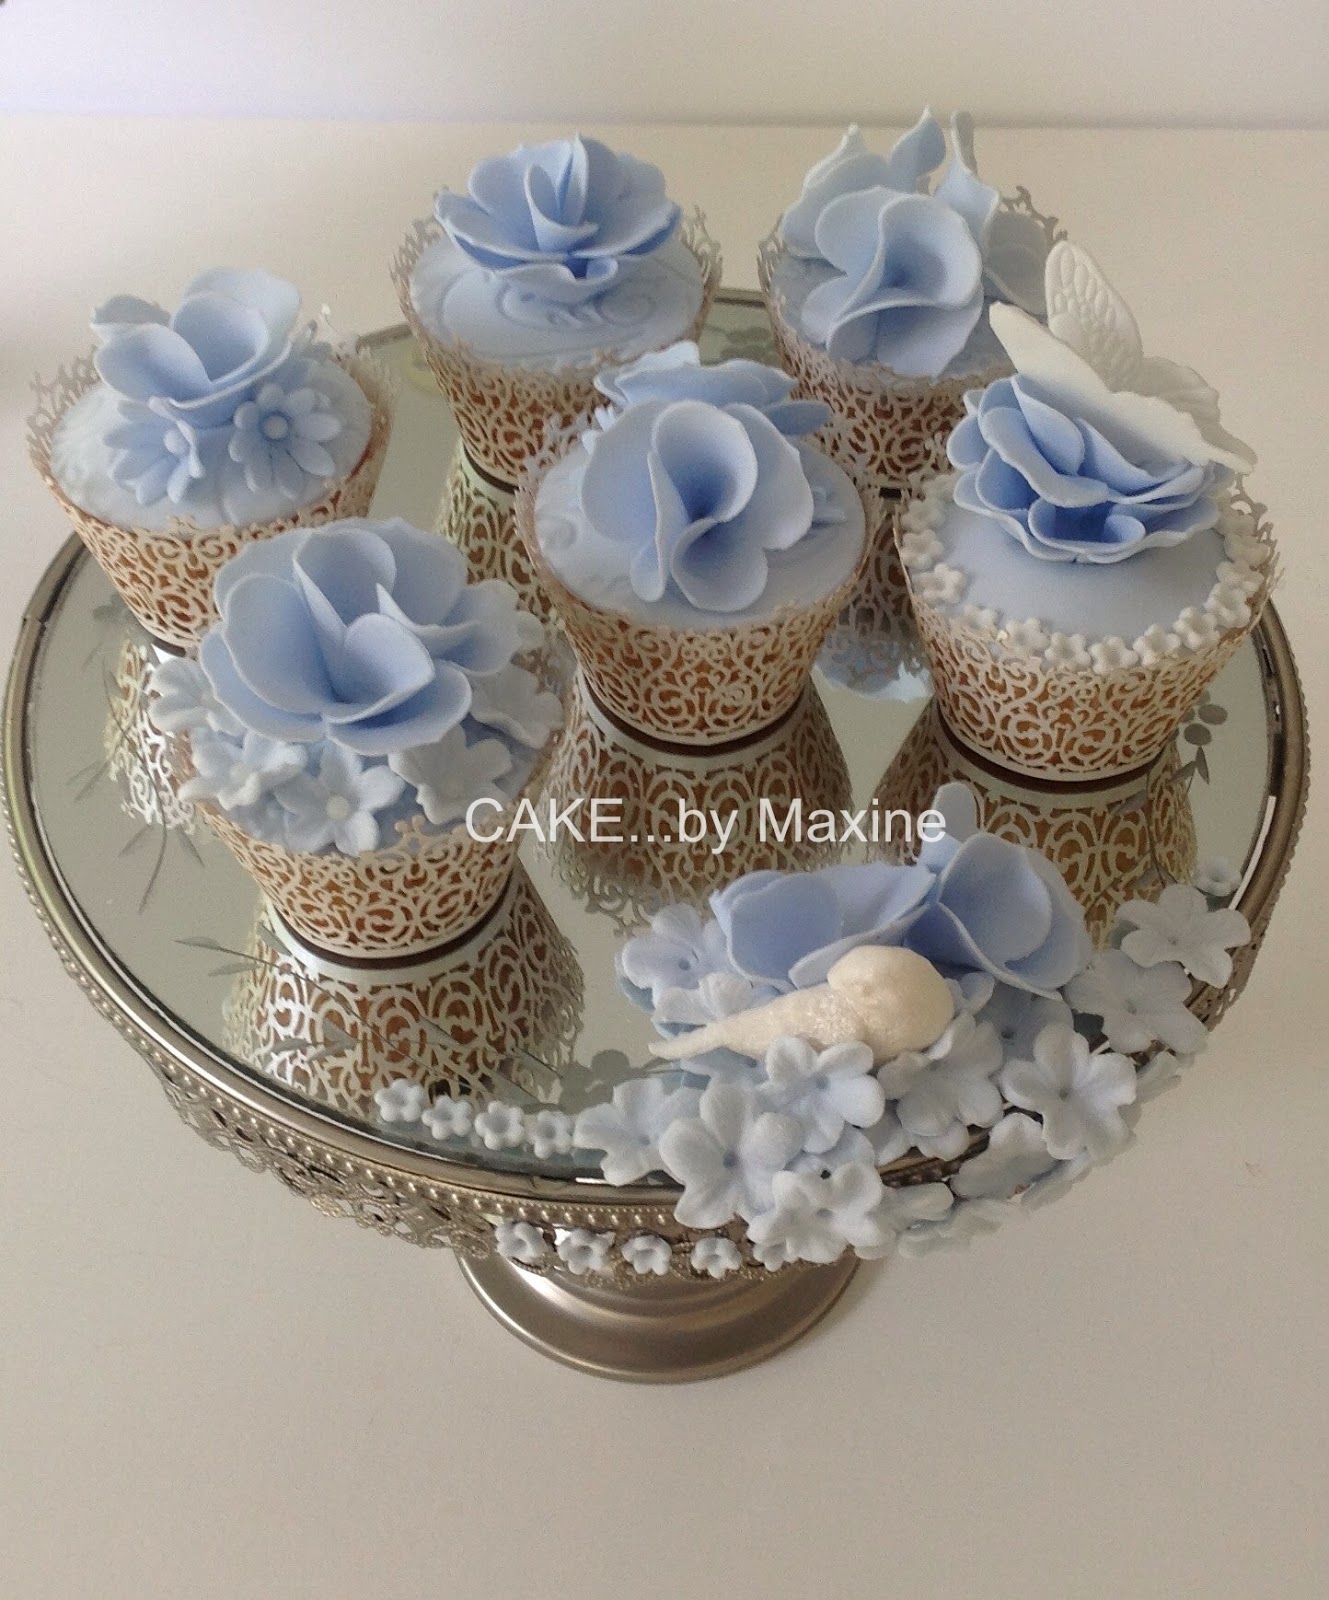 ManyWhiteBowls: BABY SHOWER - CUPCAKES PINK AND BLUE